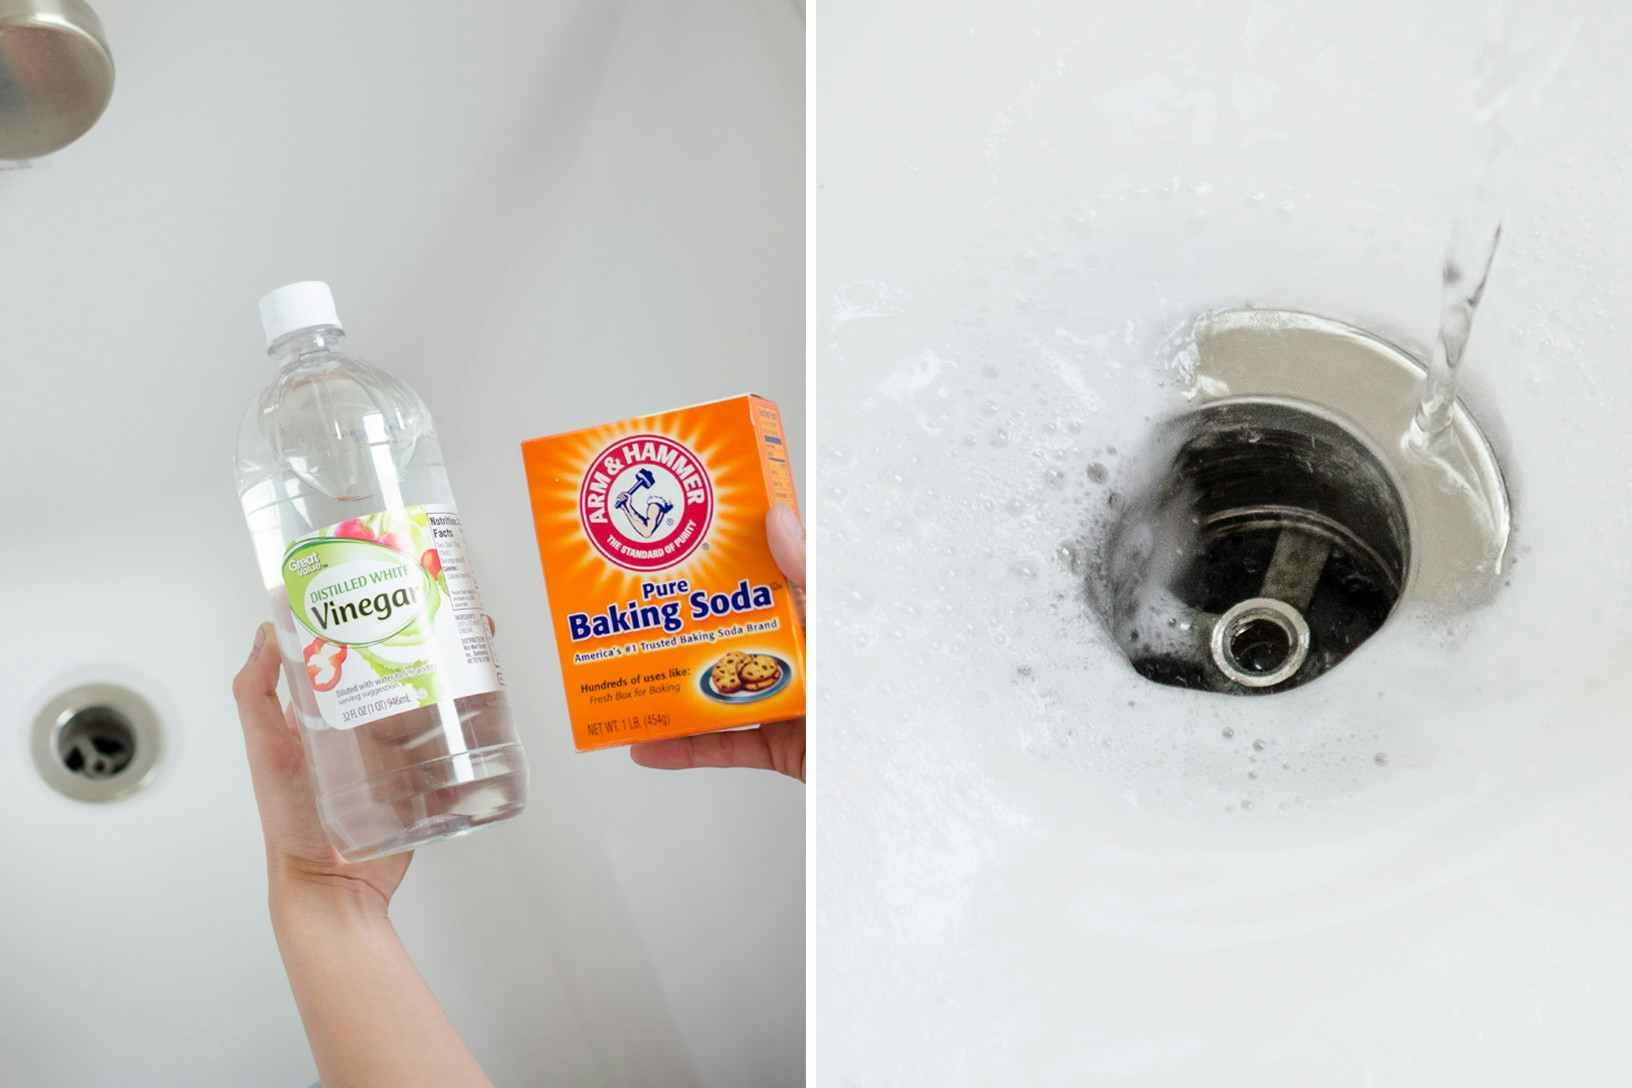 Unclog drains with one cup of baking soda and one cup of vinegar.